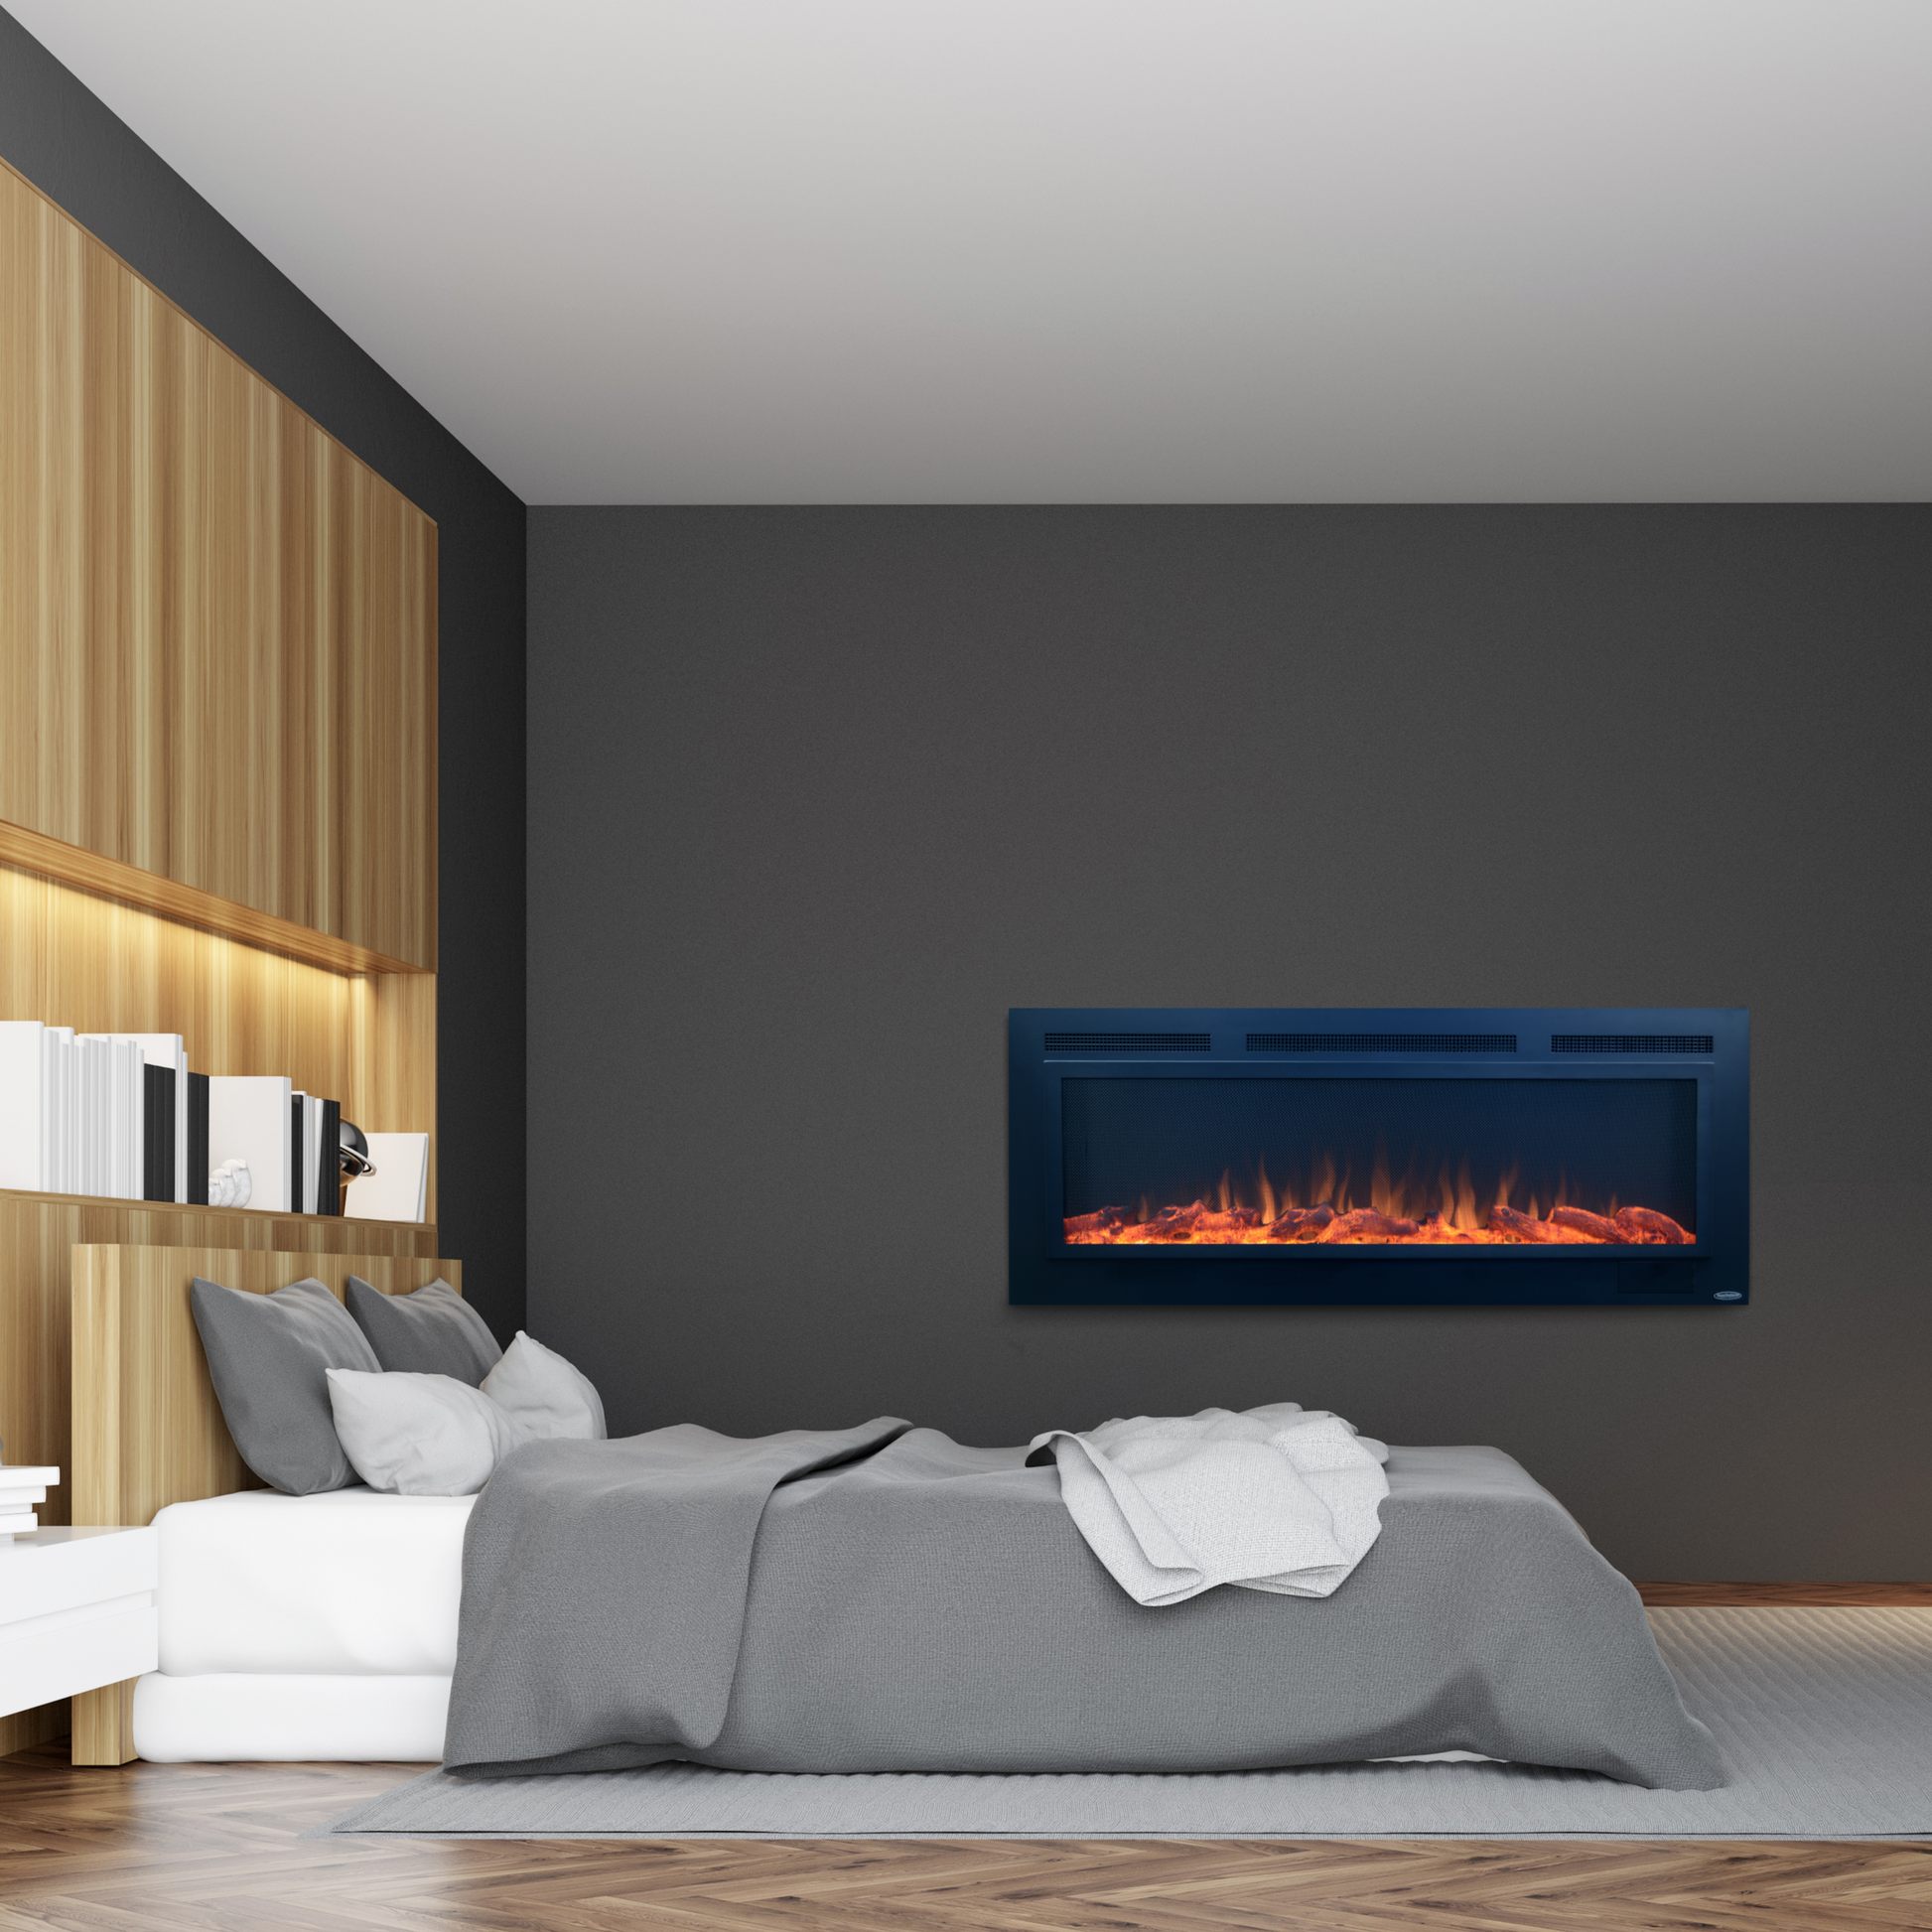 Bedroom Electric Fireplace - Touchstone Sideline 50" Steel Recessed Mounted Electric Fireplace | Very Good Fireplaces